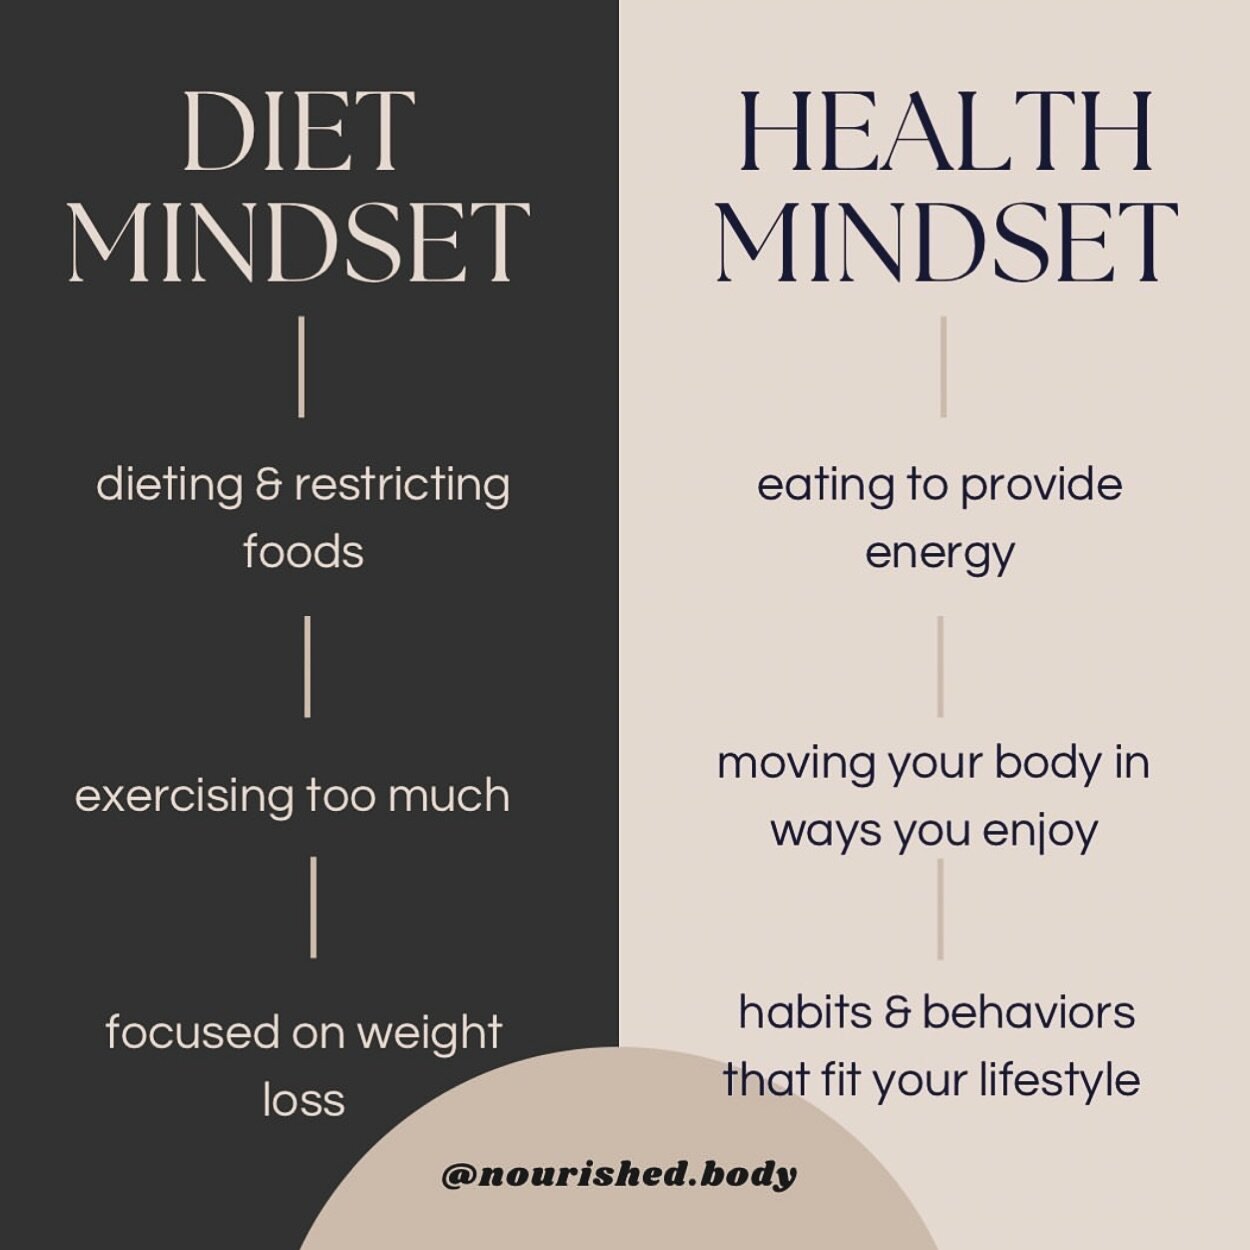 Diet or a health mindset what is the difference?!?! 

When you are focused on dieting, you are looking at weight loss as your goal, you are likely over-exercising and not eating enough. This diet mindset will set you back and it&rsquo;s almost always